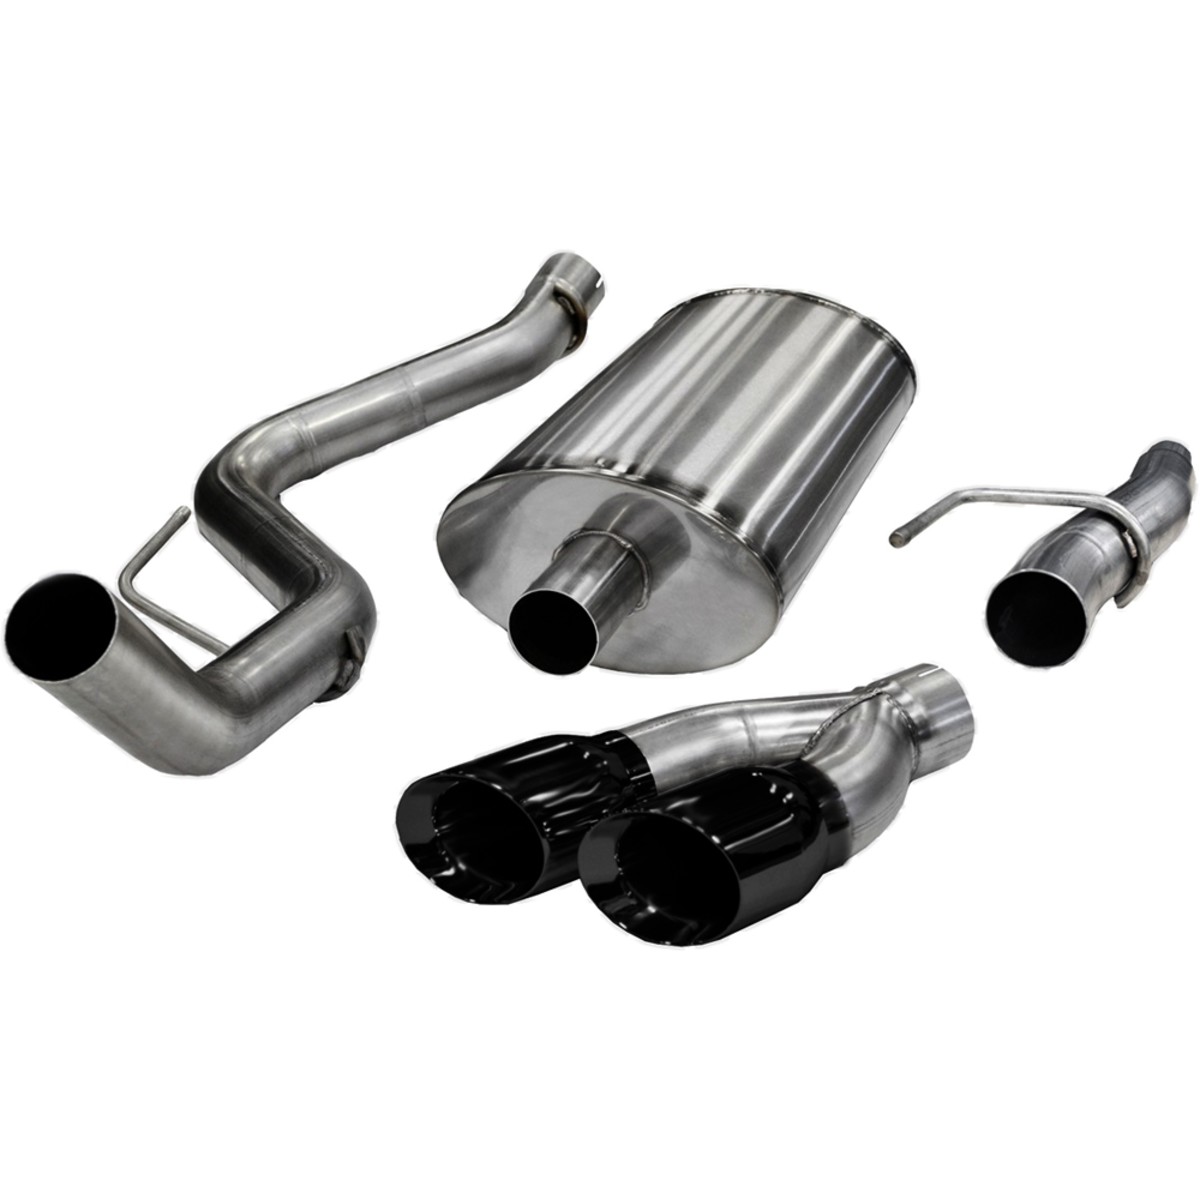 14393BLK Corsa Exhaust System New for F150 Truck Ford F-150 2011-2014 ...